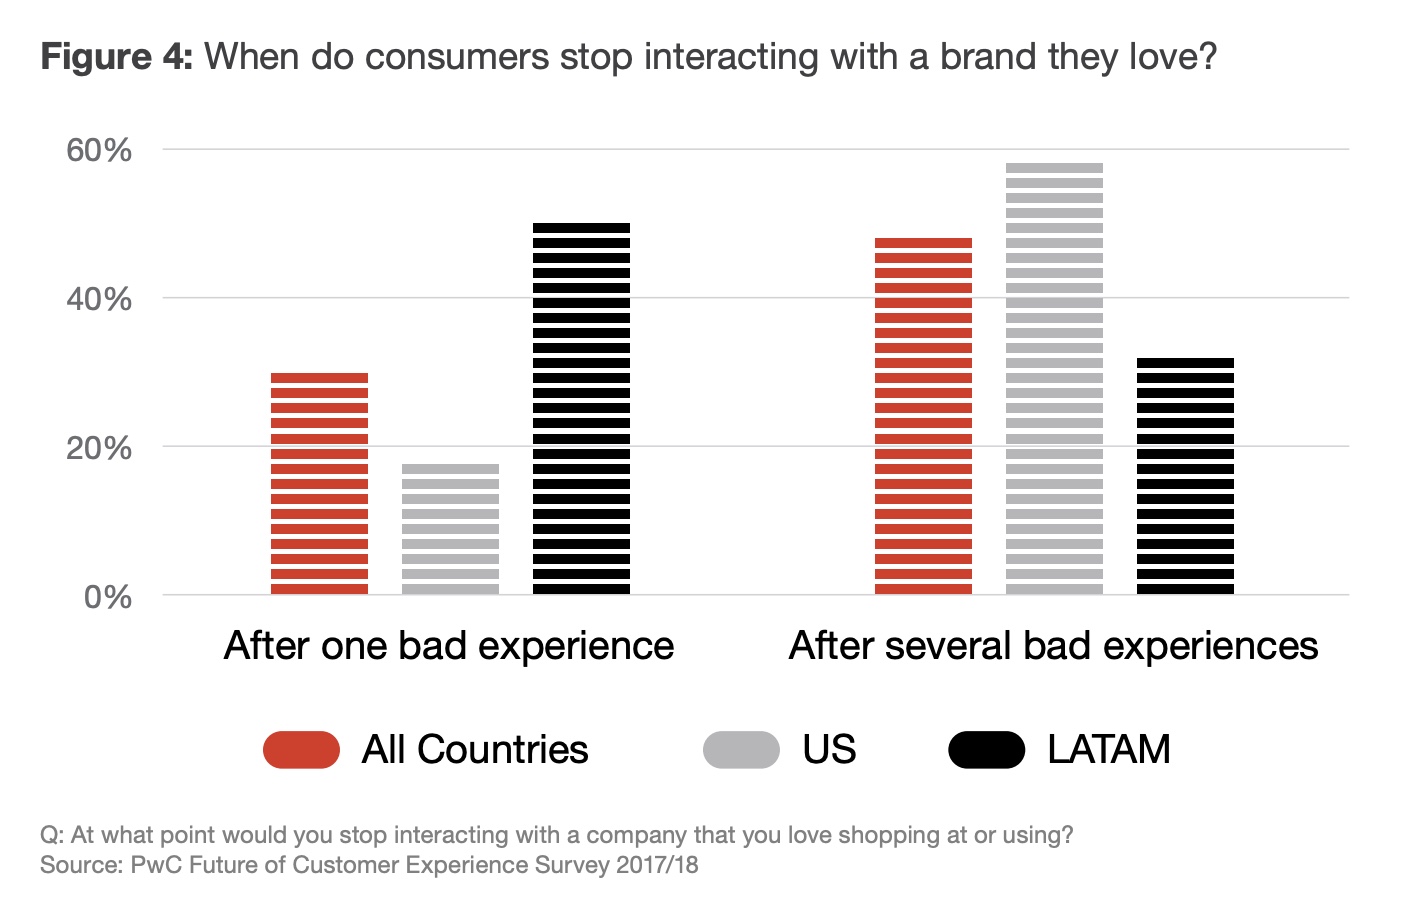 When do consumers stop interacting with a brand they love?